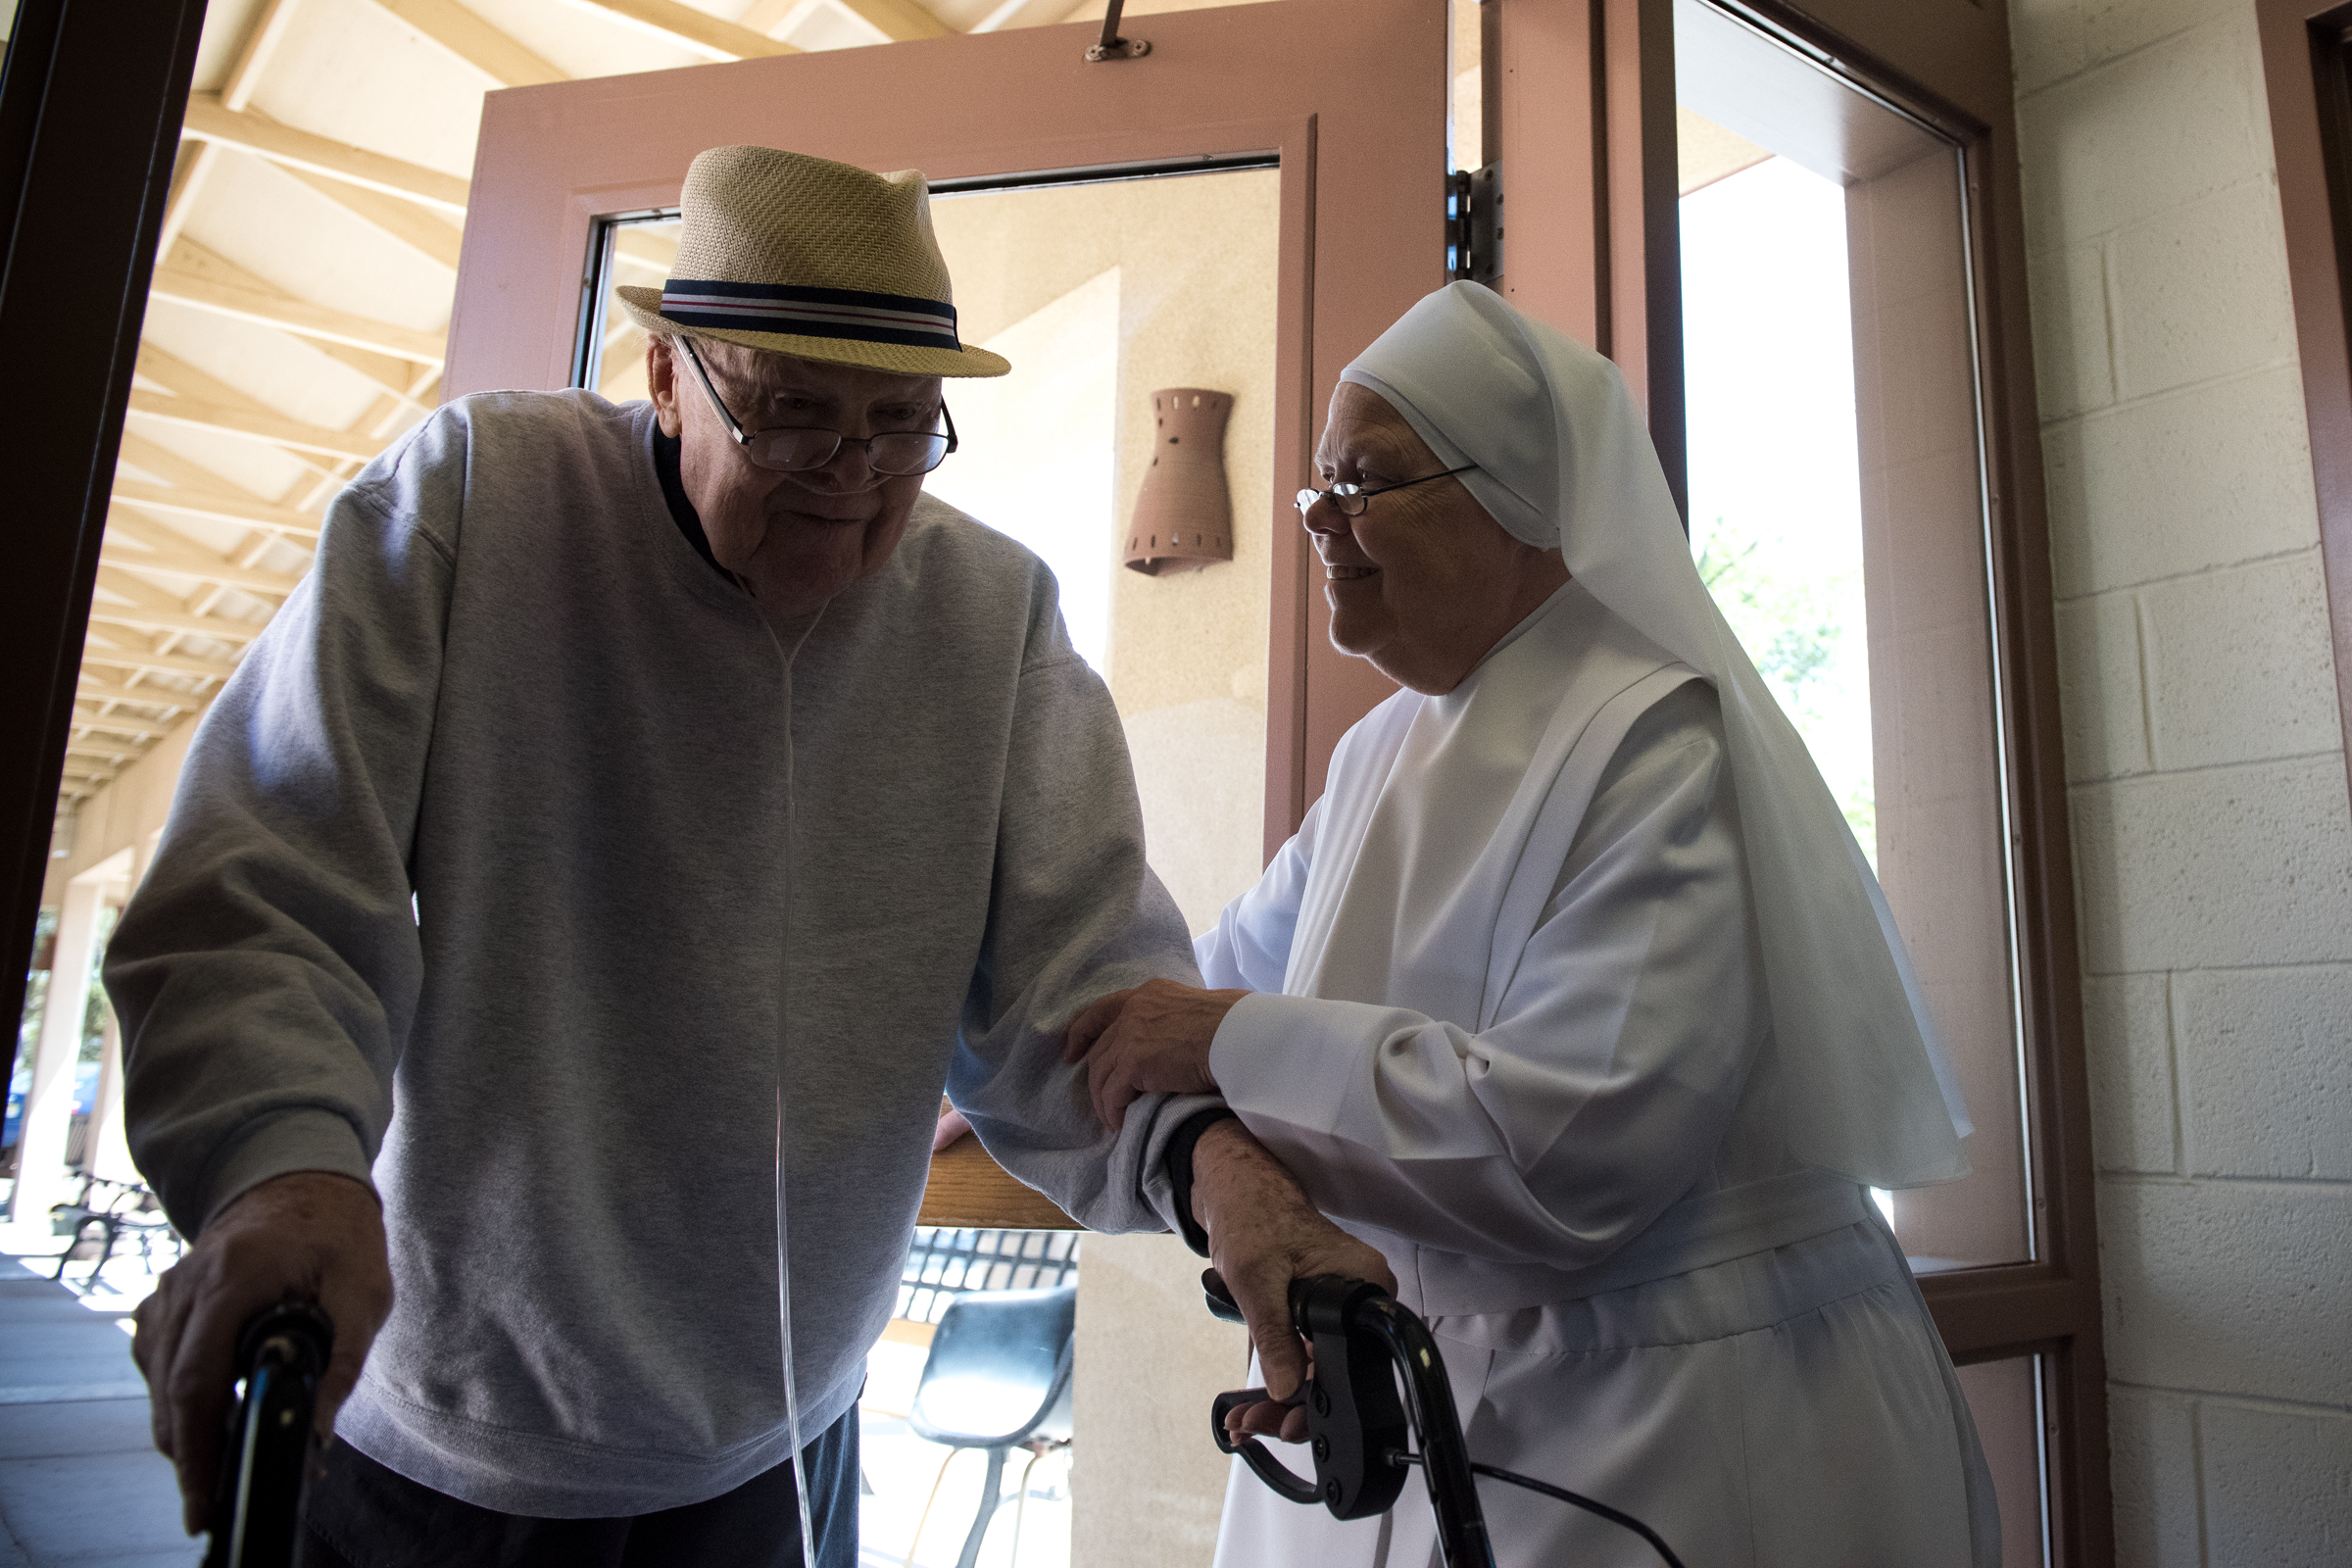 LITTLE SISTERS OF THE POOR,NEW MEXICO